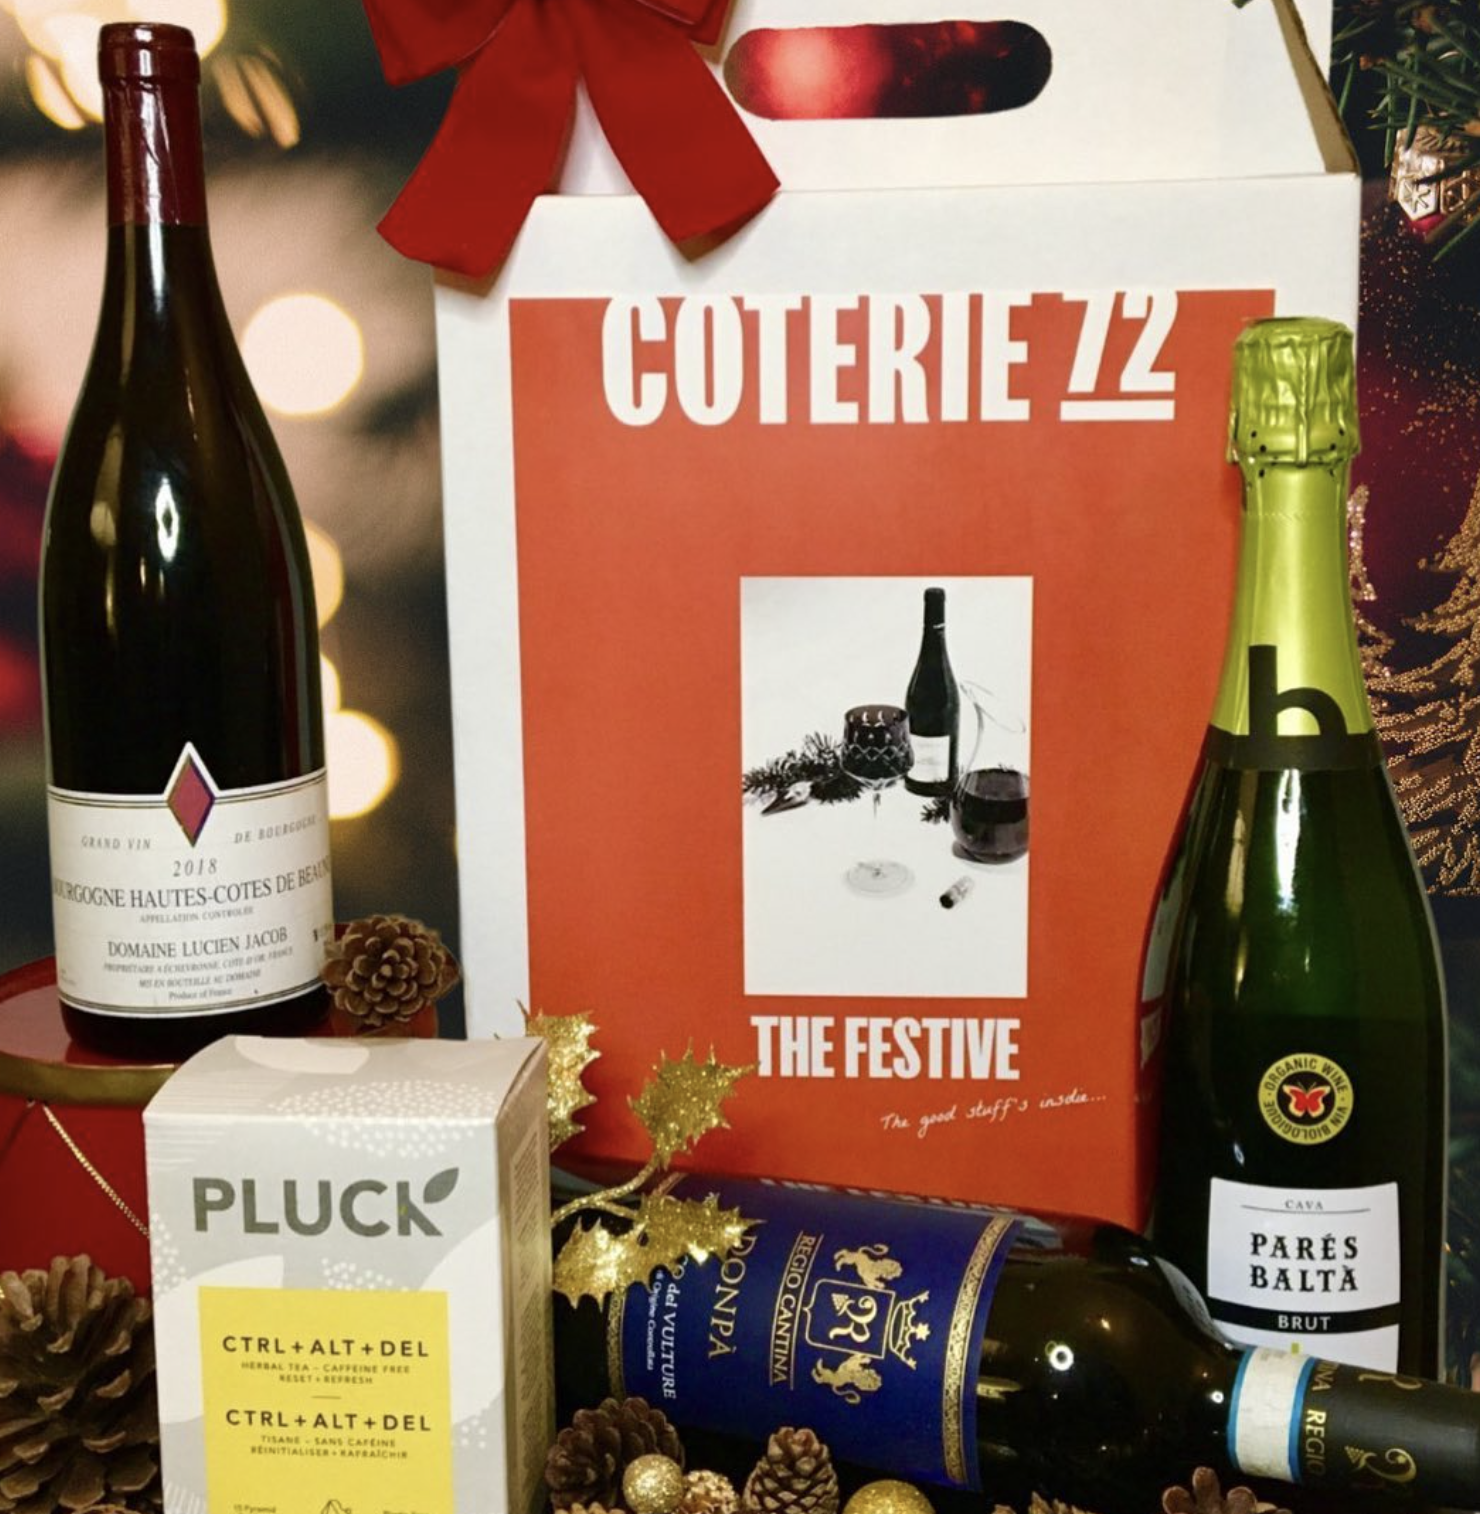 3 wine bottles are posed around a holiday wreath and a box that reads &quot;COTERIE 72; THE FESTIVE.&quot;